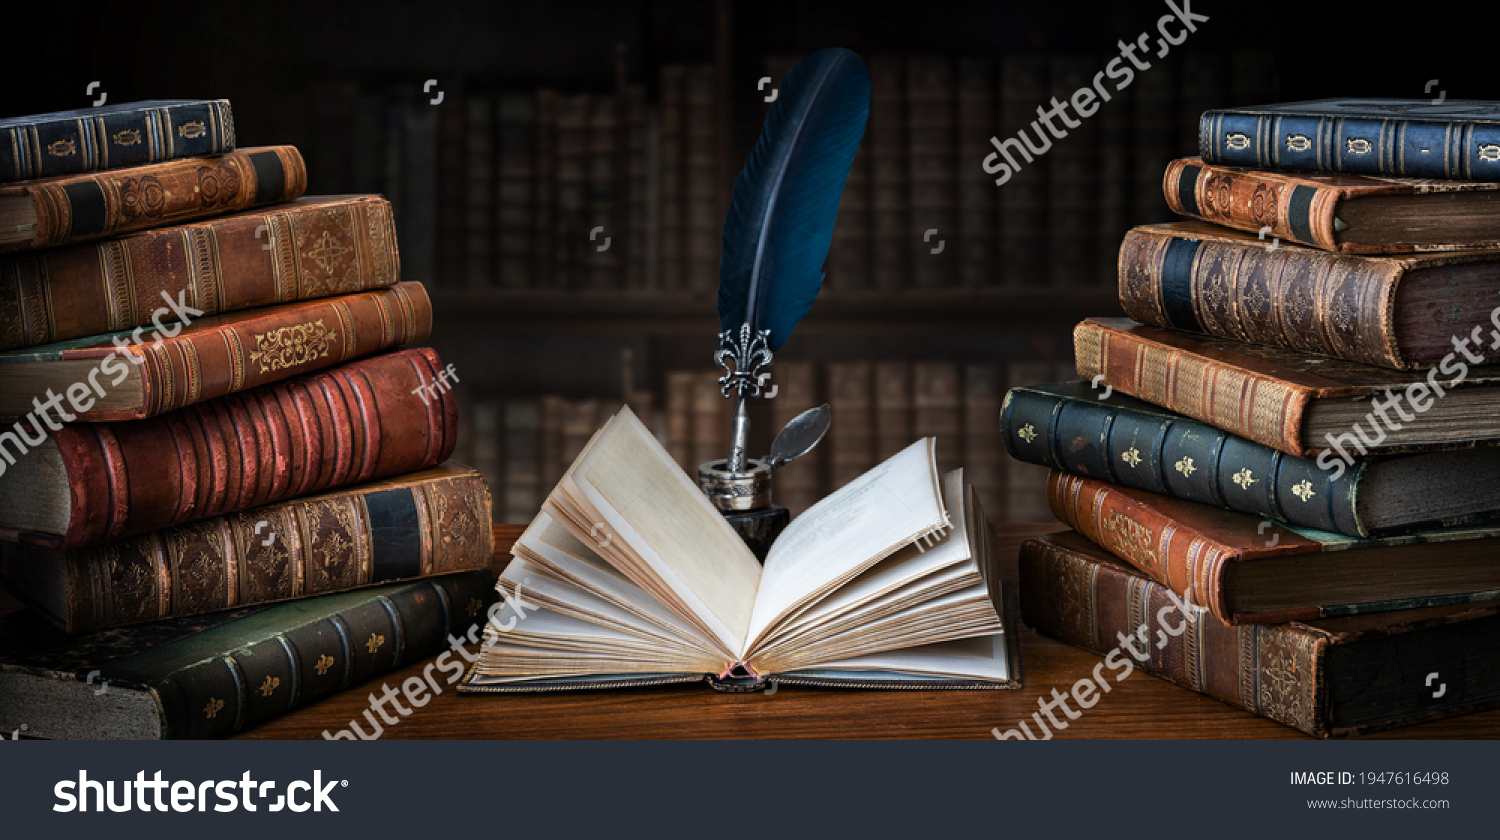 Old books ,quill pen and vintage inkwell on wooden desk in old library. Ancient books historical background. Retro style. Conceptual background on history, education, literature topics. #1947616498